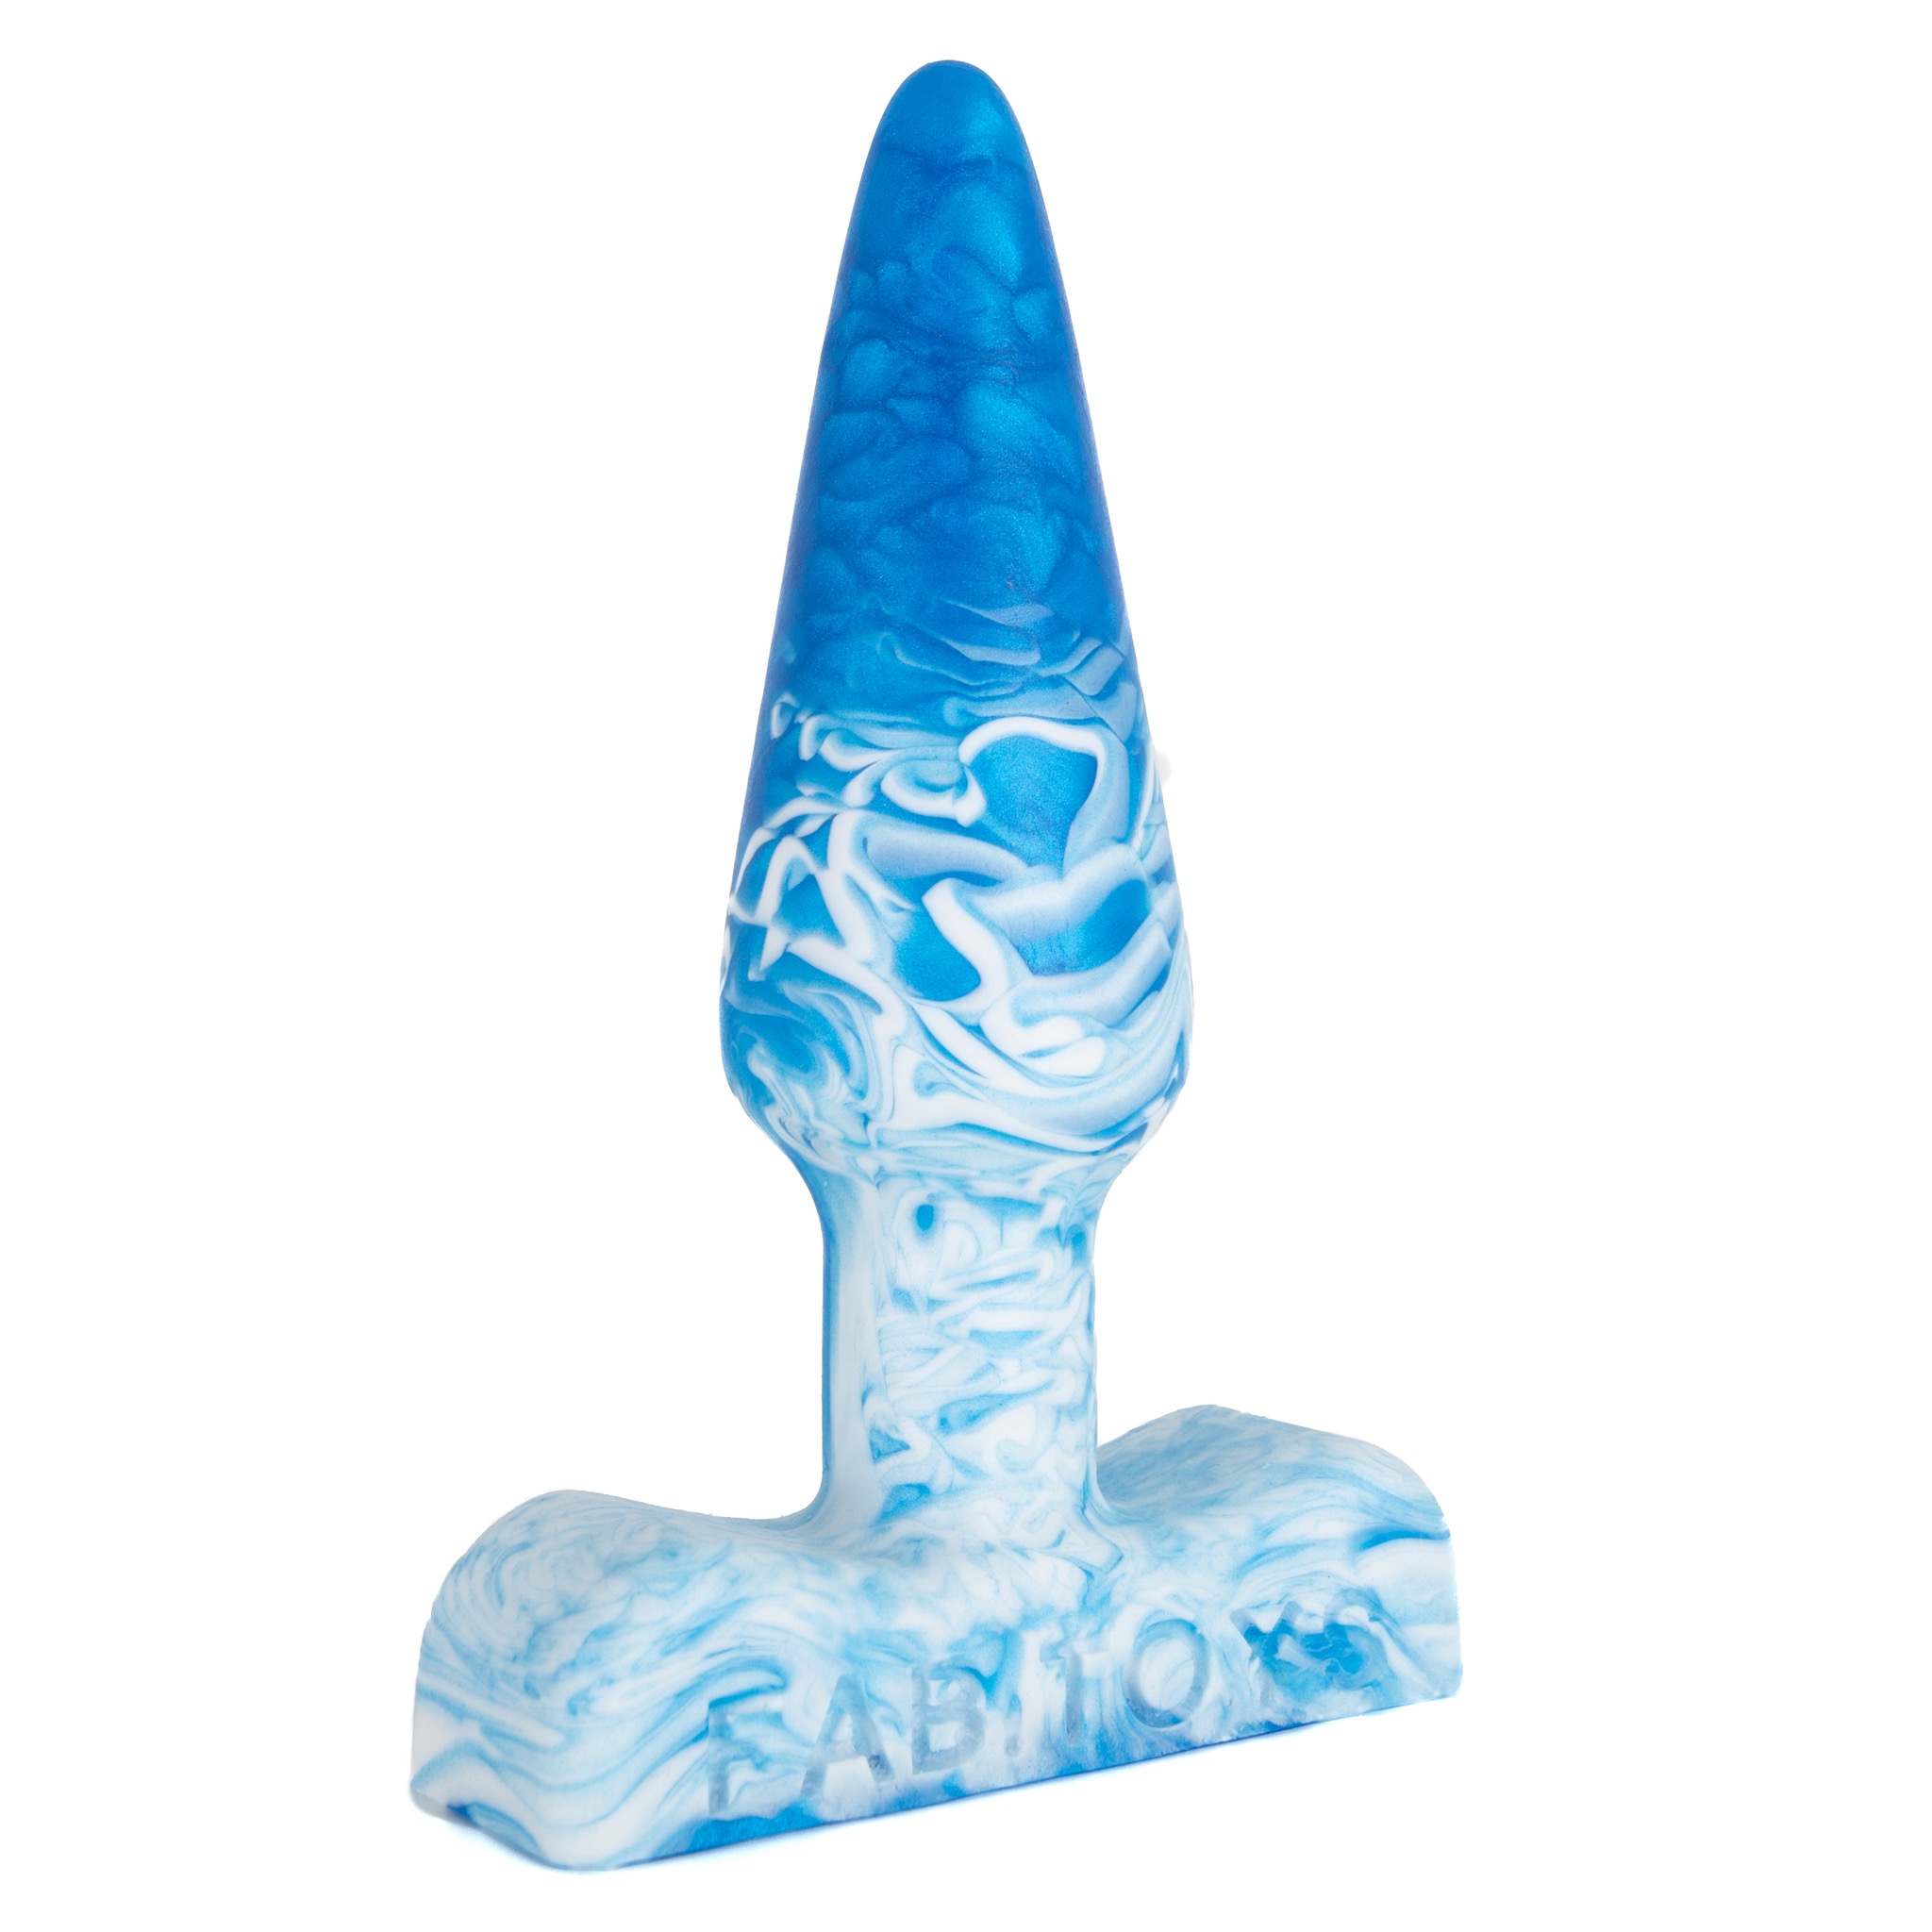 Classic Butt Plug - Large - Blue and White